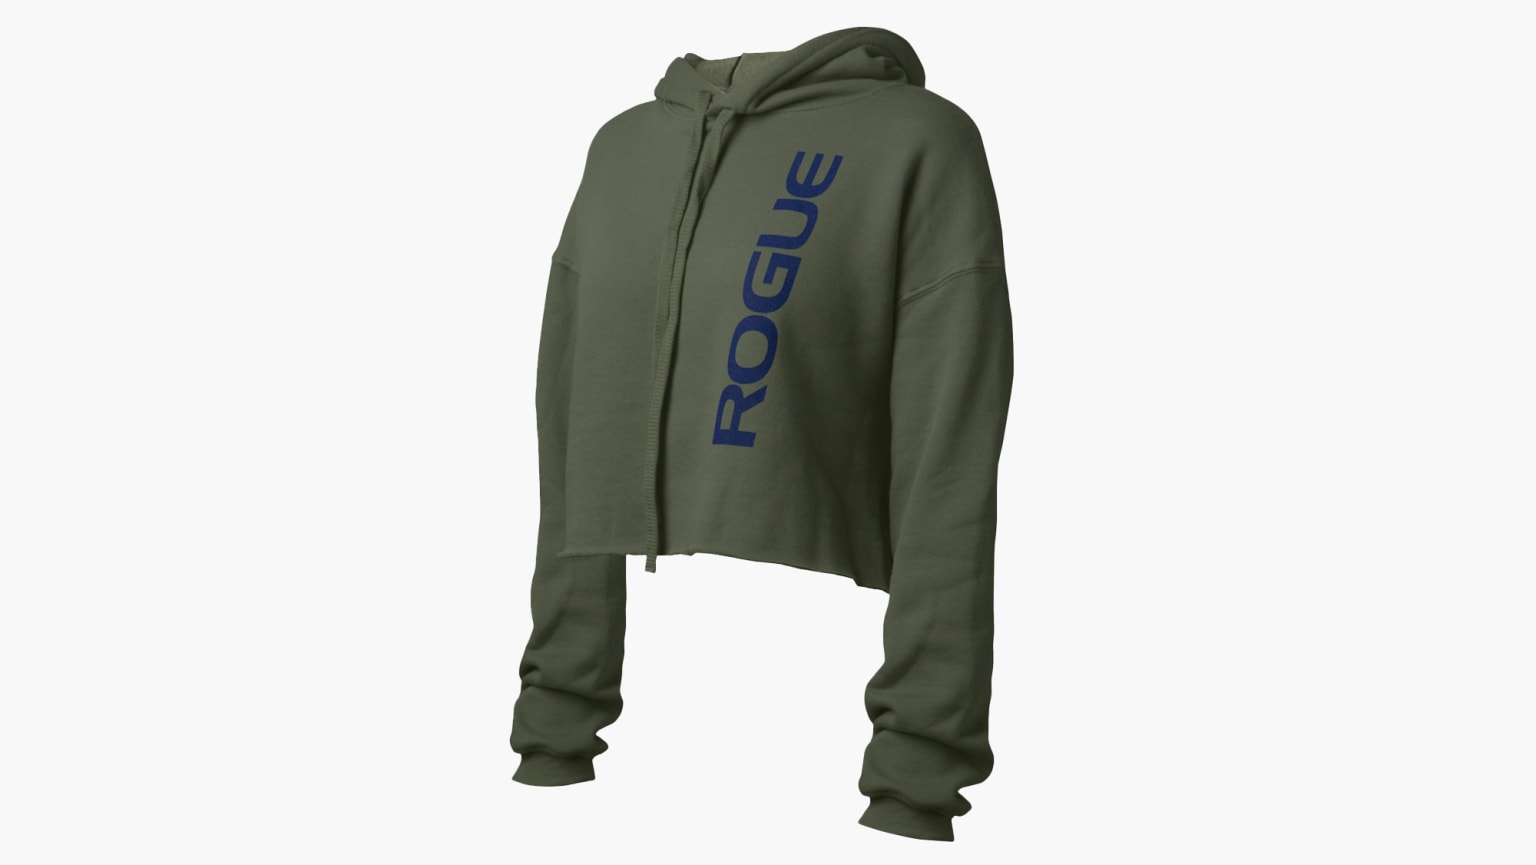 Spiritus Nysgerrighed labyrint Rogue Crop Hoodie - Women's - Green | Rogue Fitness